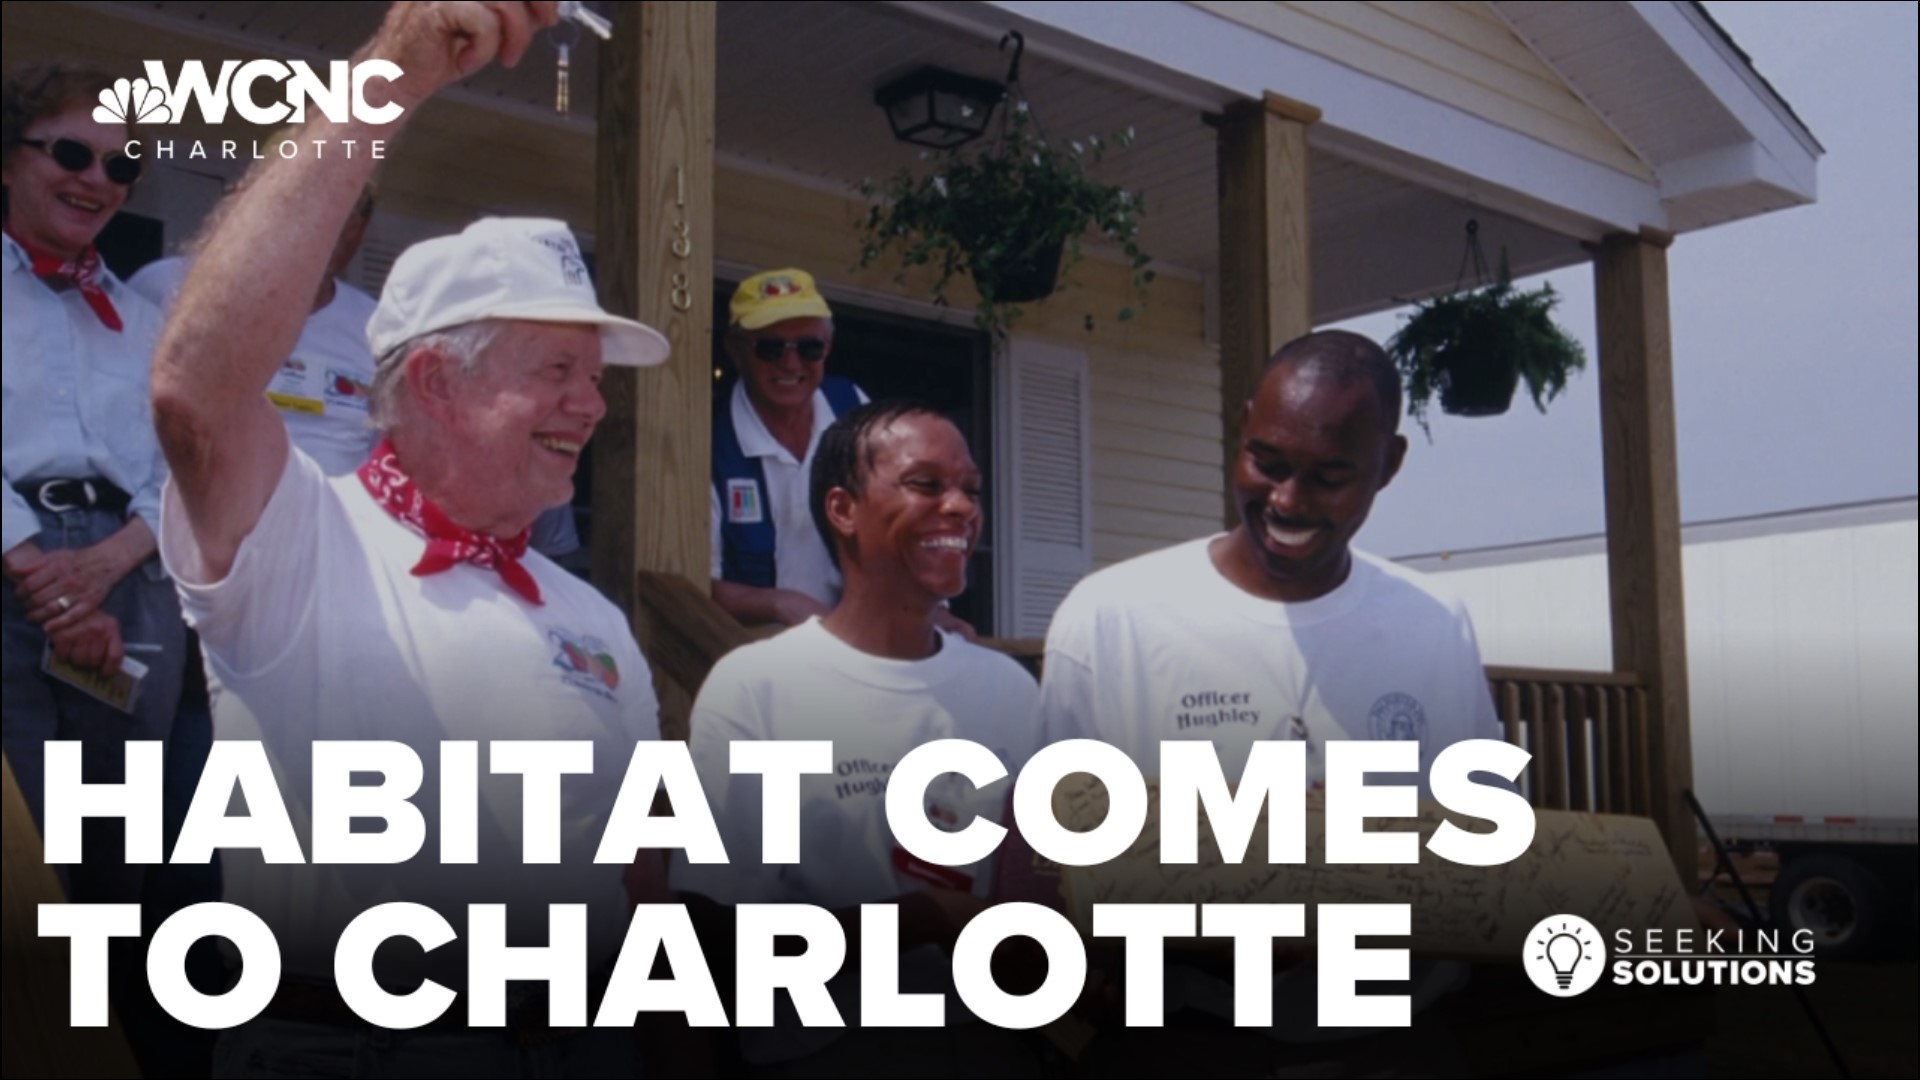 For nearly four decades, the Carter Work Project has worked with Habitat for Humanity, building homes for those who can't afford them on their own.